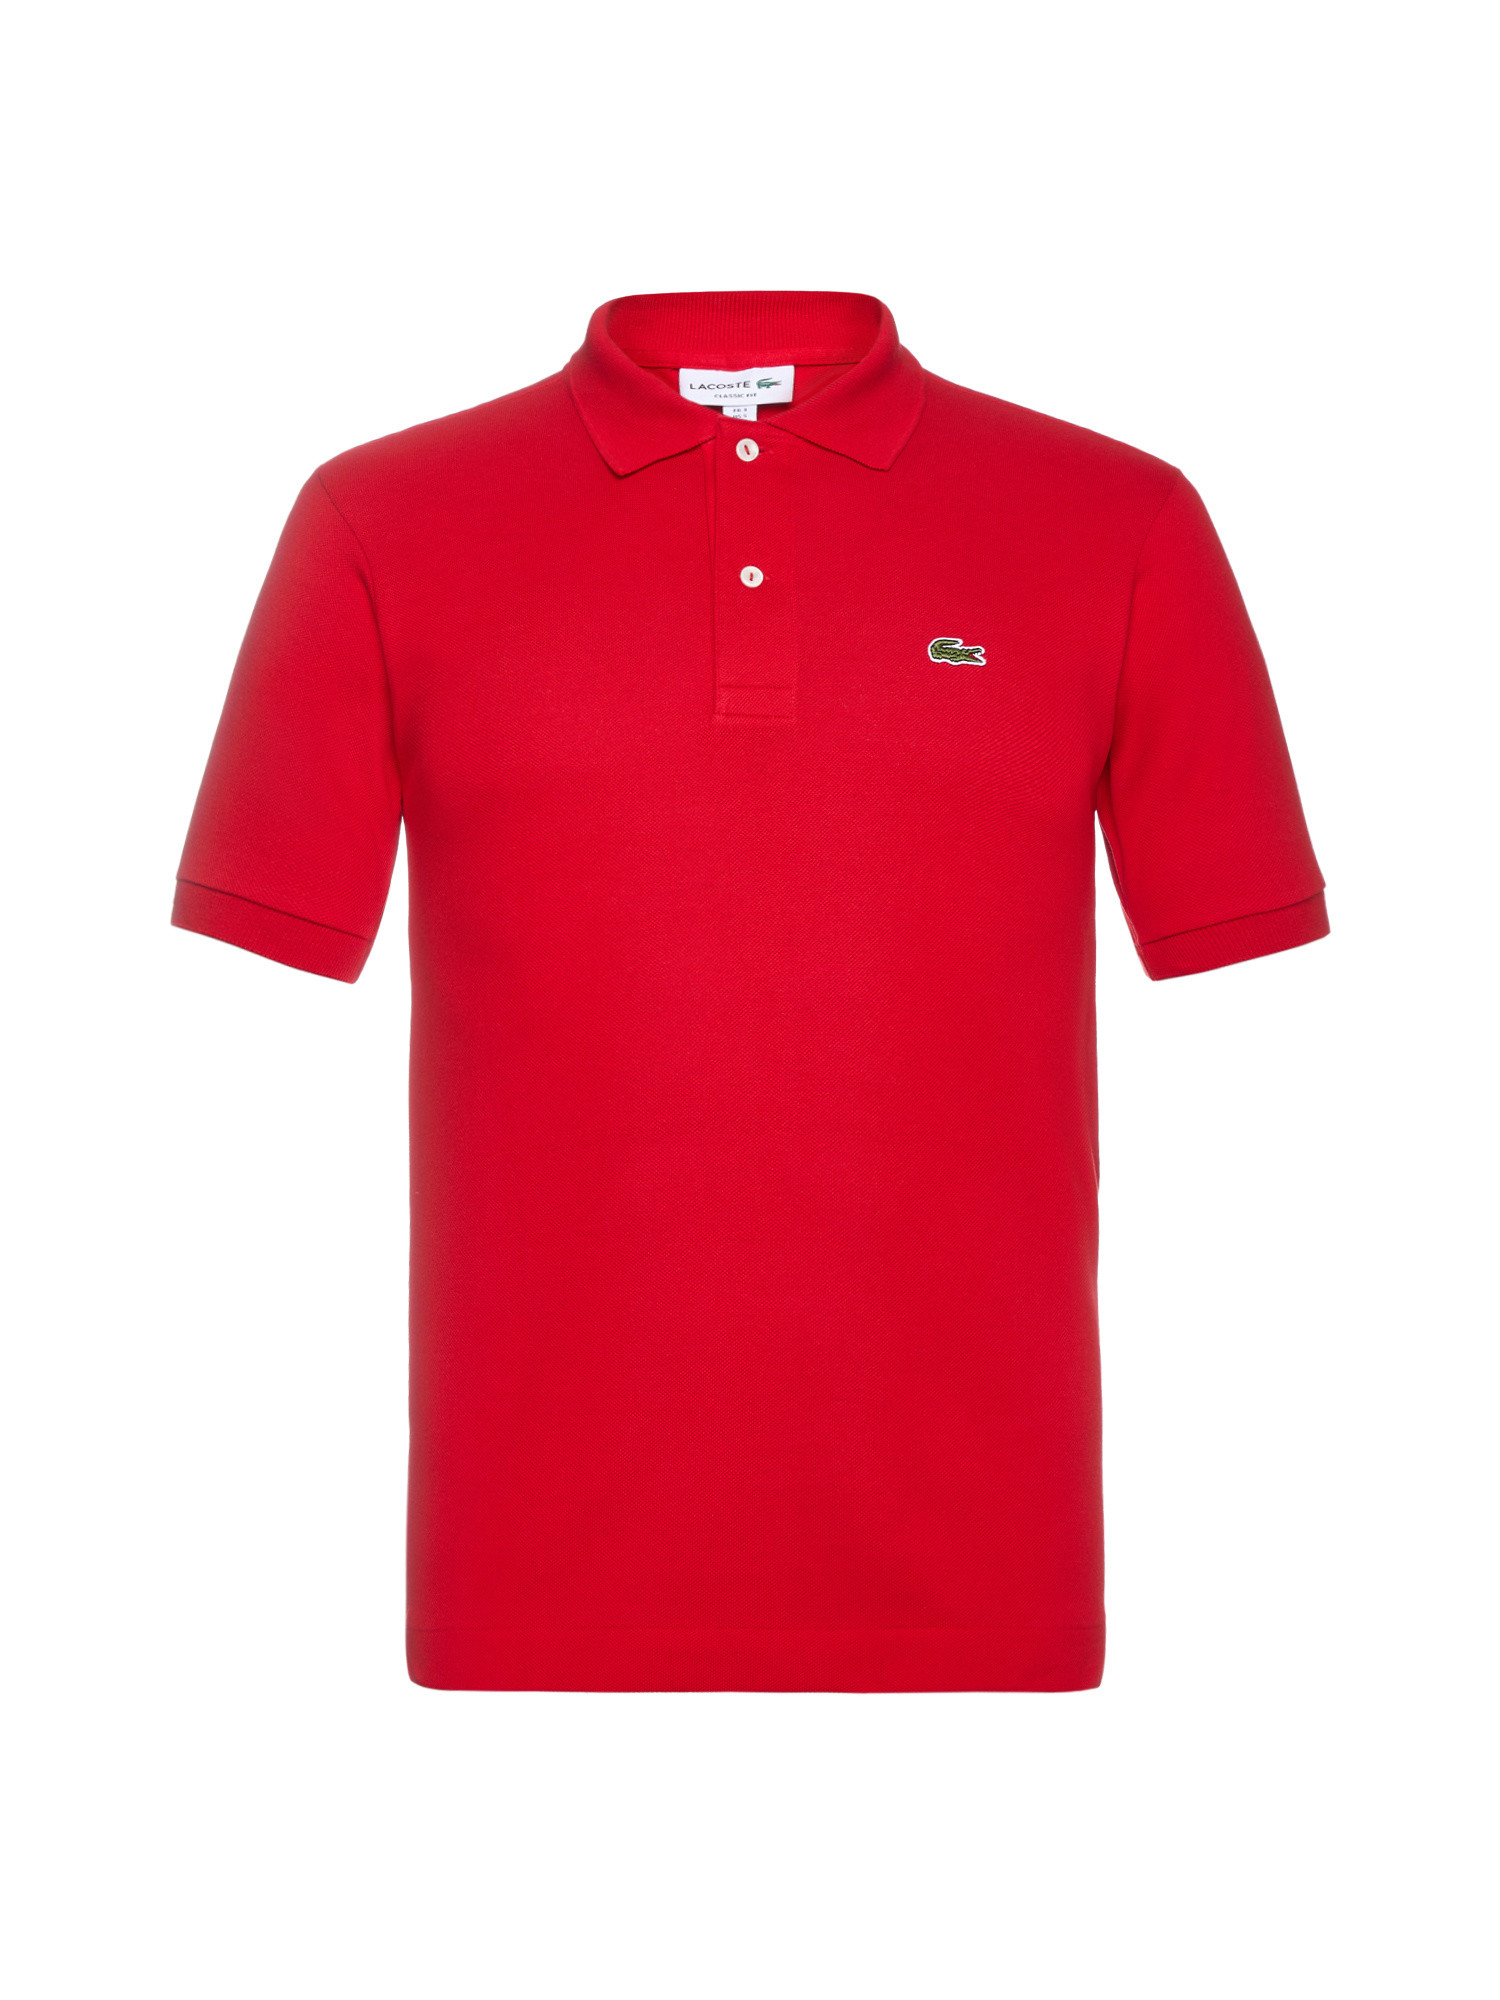 Lacoste - Polo in petit piqué di cotone, Rosso, large image number 0